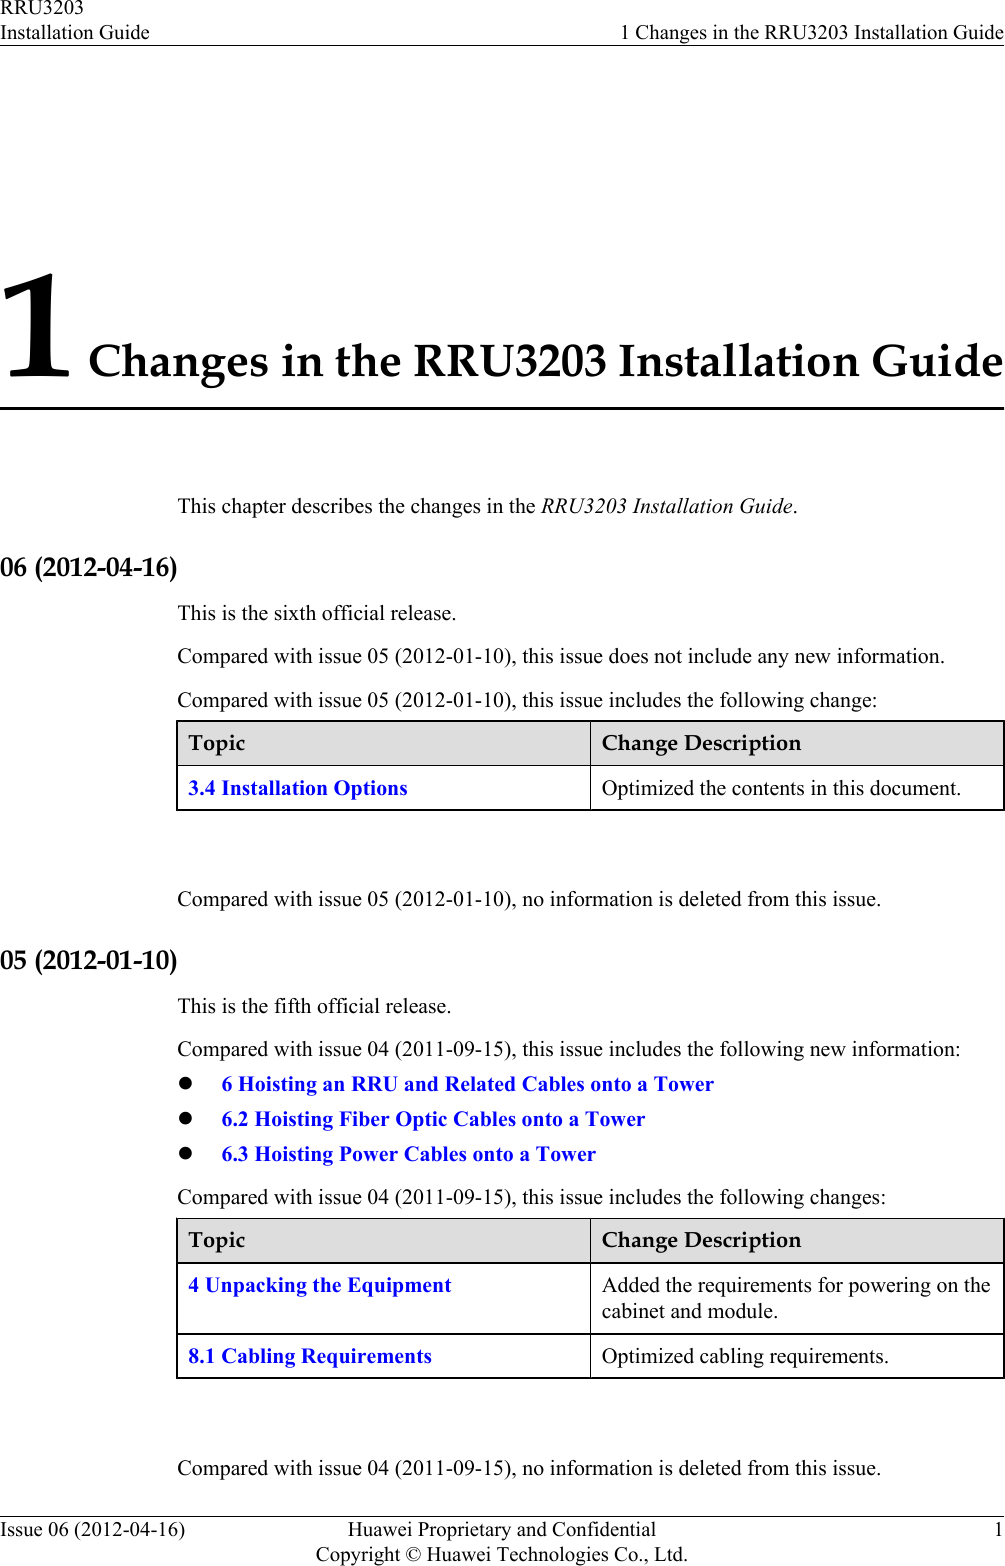 1 Changes in the RRU3203 Installation GuideThis chapter describes the changes in the RRU3203 Installation Guide.06 (2012-04-16)This is the sixth official release.Compared with issue 05 (2012-01-10), this issue does not include any new information.Compared with issue 05 (2012-01-10), this issue includes the following change:Topic Change Description3.4 Installation Options Optimized the contents in this document. Compared with issue 05 (2012-01-10), no information is deleted from this issue.05 (2012-01-10)This is the fifth official release.Compared with issue 04 (2011-09-15), this issue includes the following new information:l6 Hoisting an RRU and Related Cables onto a Towerl6.2 Hoisting Fiber Optic Cables onto a Towerl6.3 Hoisting Power Cables onto a TowerCompared with issue 04 (2011-09-15), this issue includes the following changes:Topic Change Description4 Unpacking the Equipment Added the requirements for powering on thecabinet and module.8.1 Cabling Requirements Optimized cabling requirements. Compared with issue 04 (2011-09-15), no information is deleted from this issue.RRU3203Installation Guide 1 Changes in the RRU3203 Installation GuideIssue 06 (2012-04-16) Huawei Proprietary and ConfidentialCopyright © Huawei Technologies Co., Ltd.1